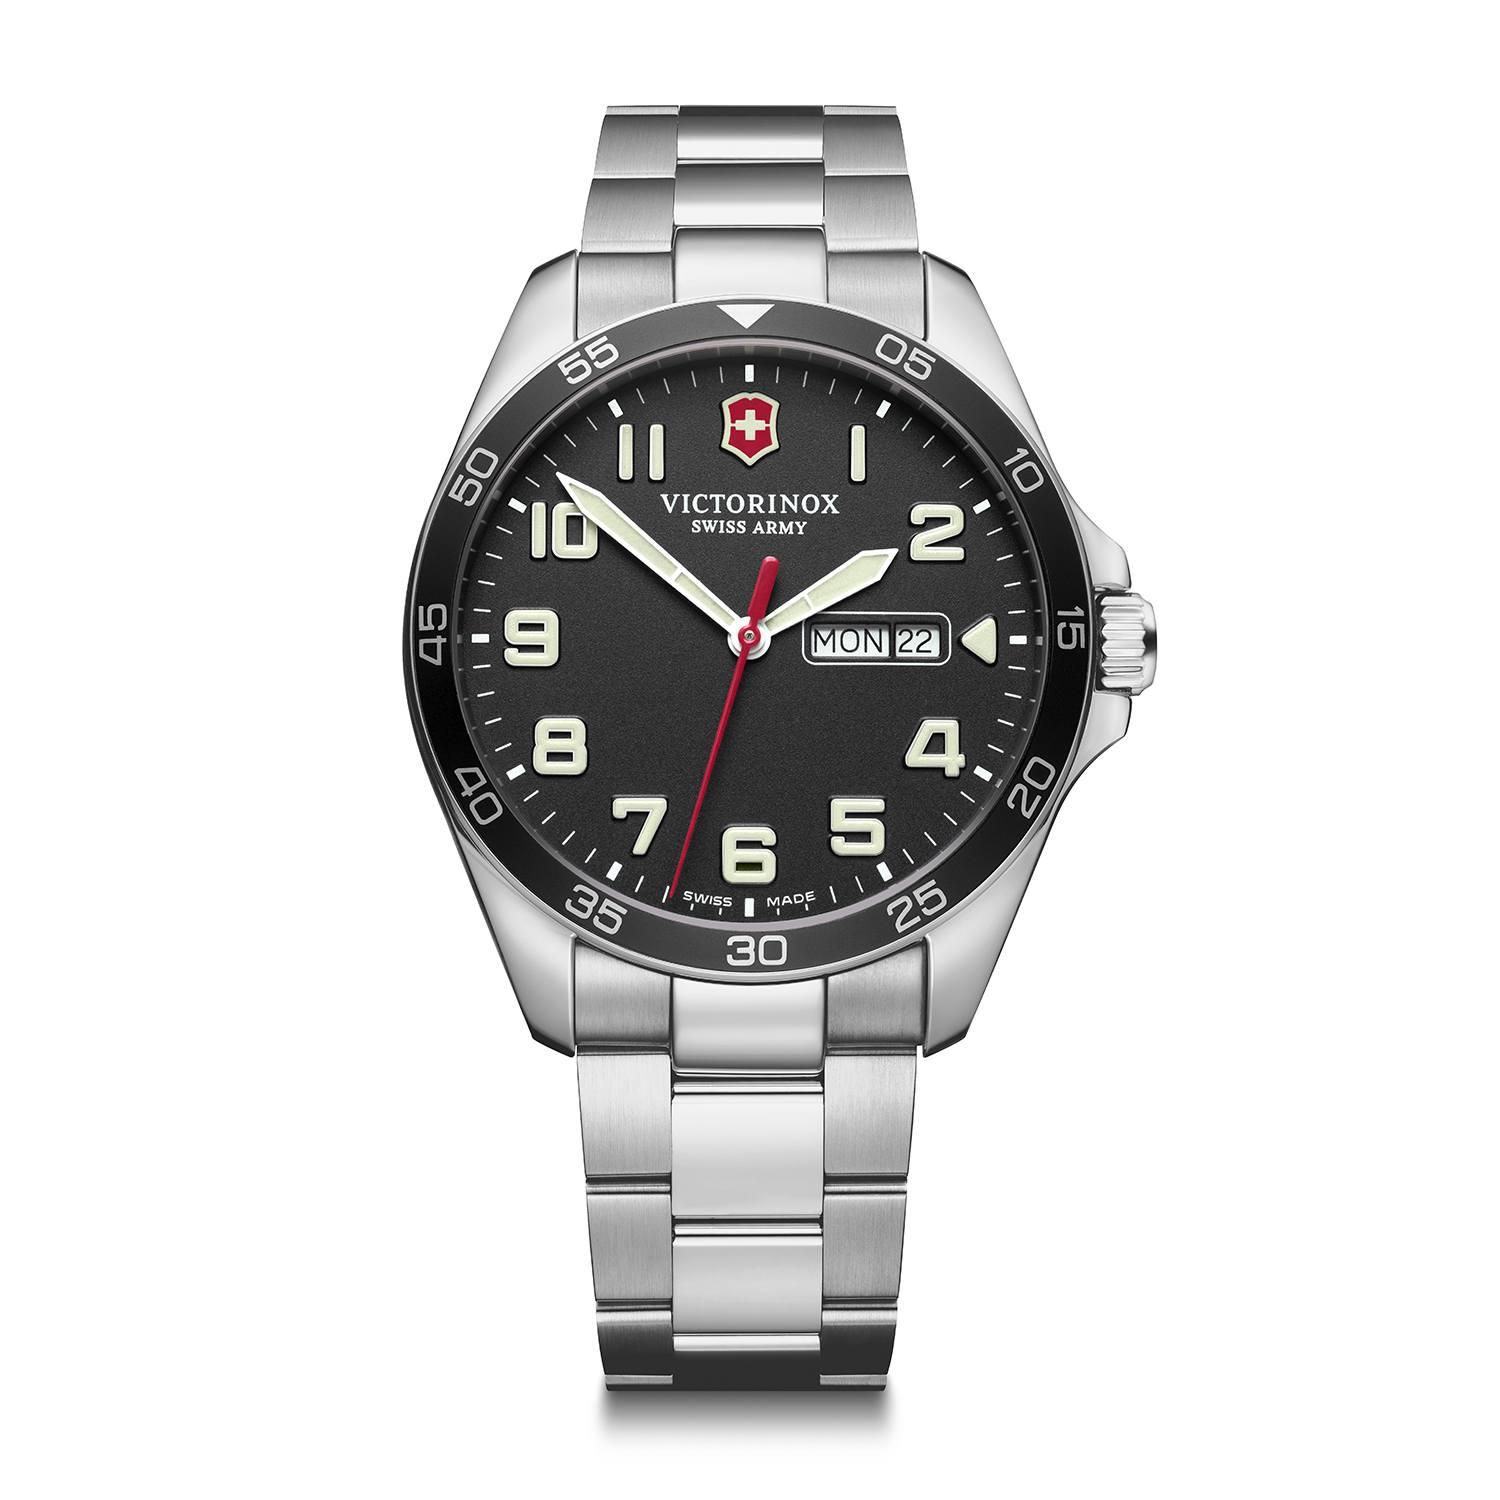 Victorinox Swiss Army Fieldforce Gent's Timepiece with Black Dial, 42mm